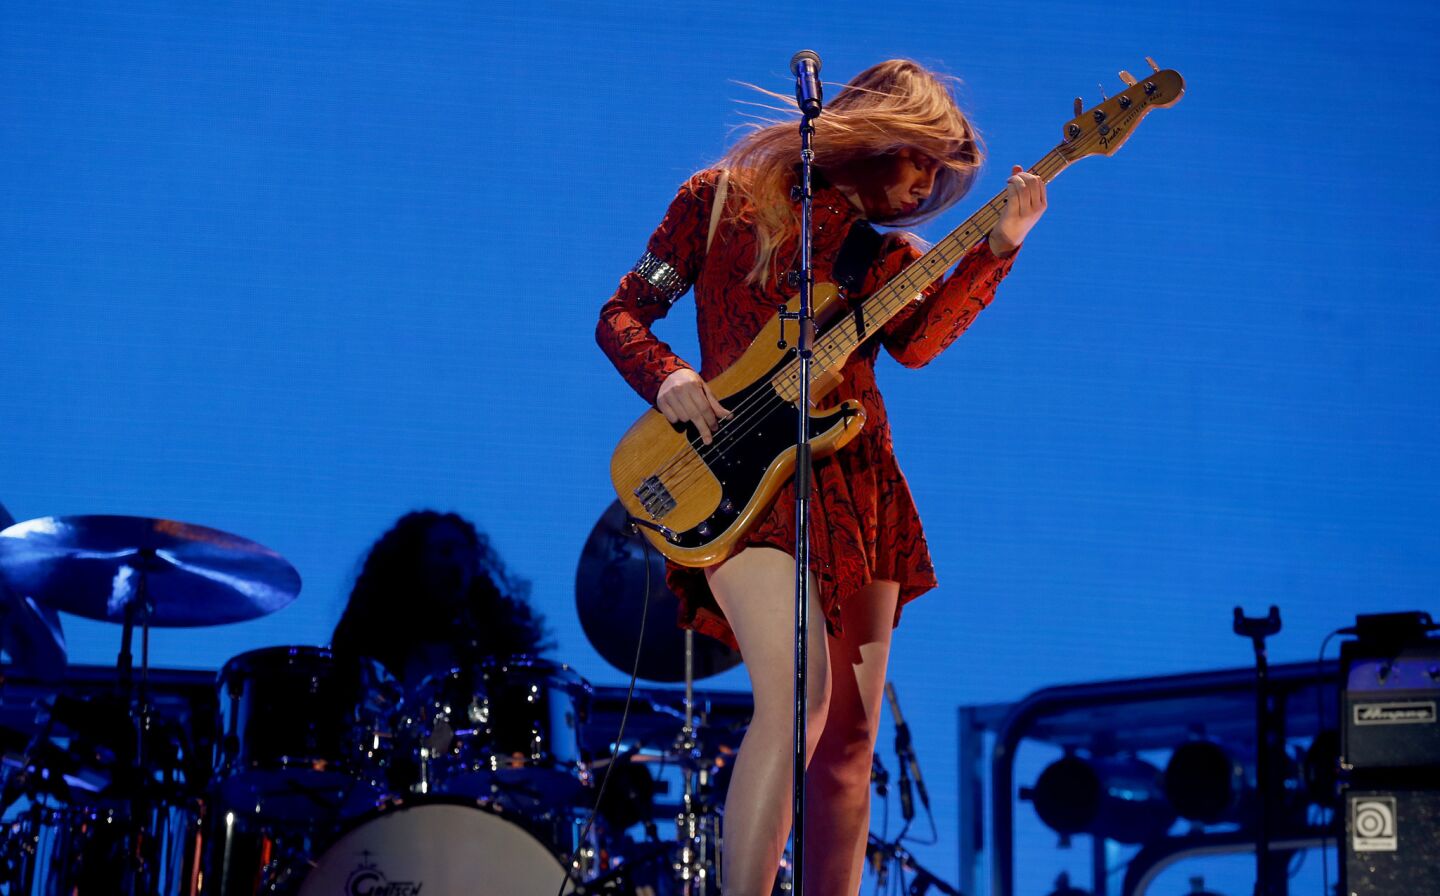 Bassist Este Haim performs with her sisters.